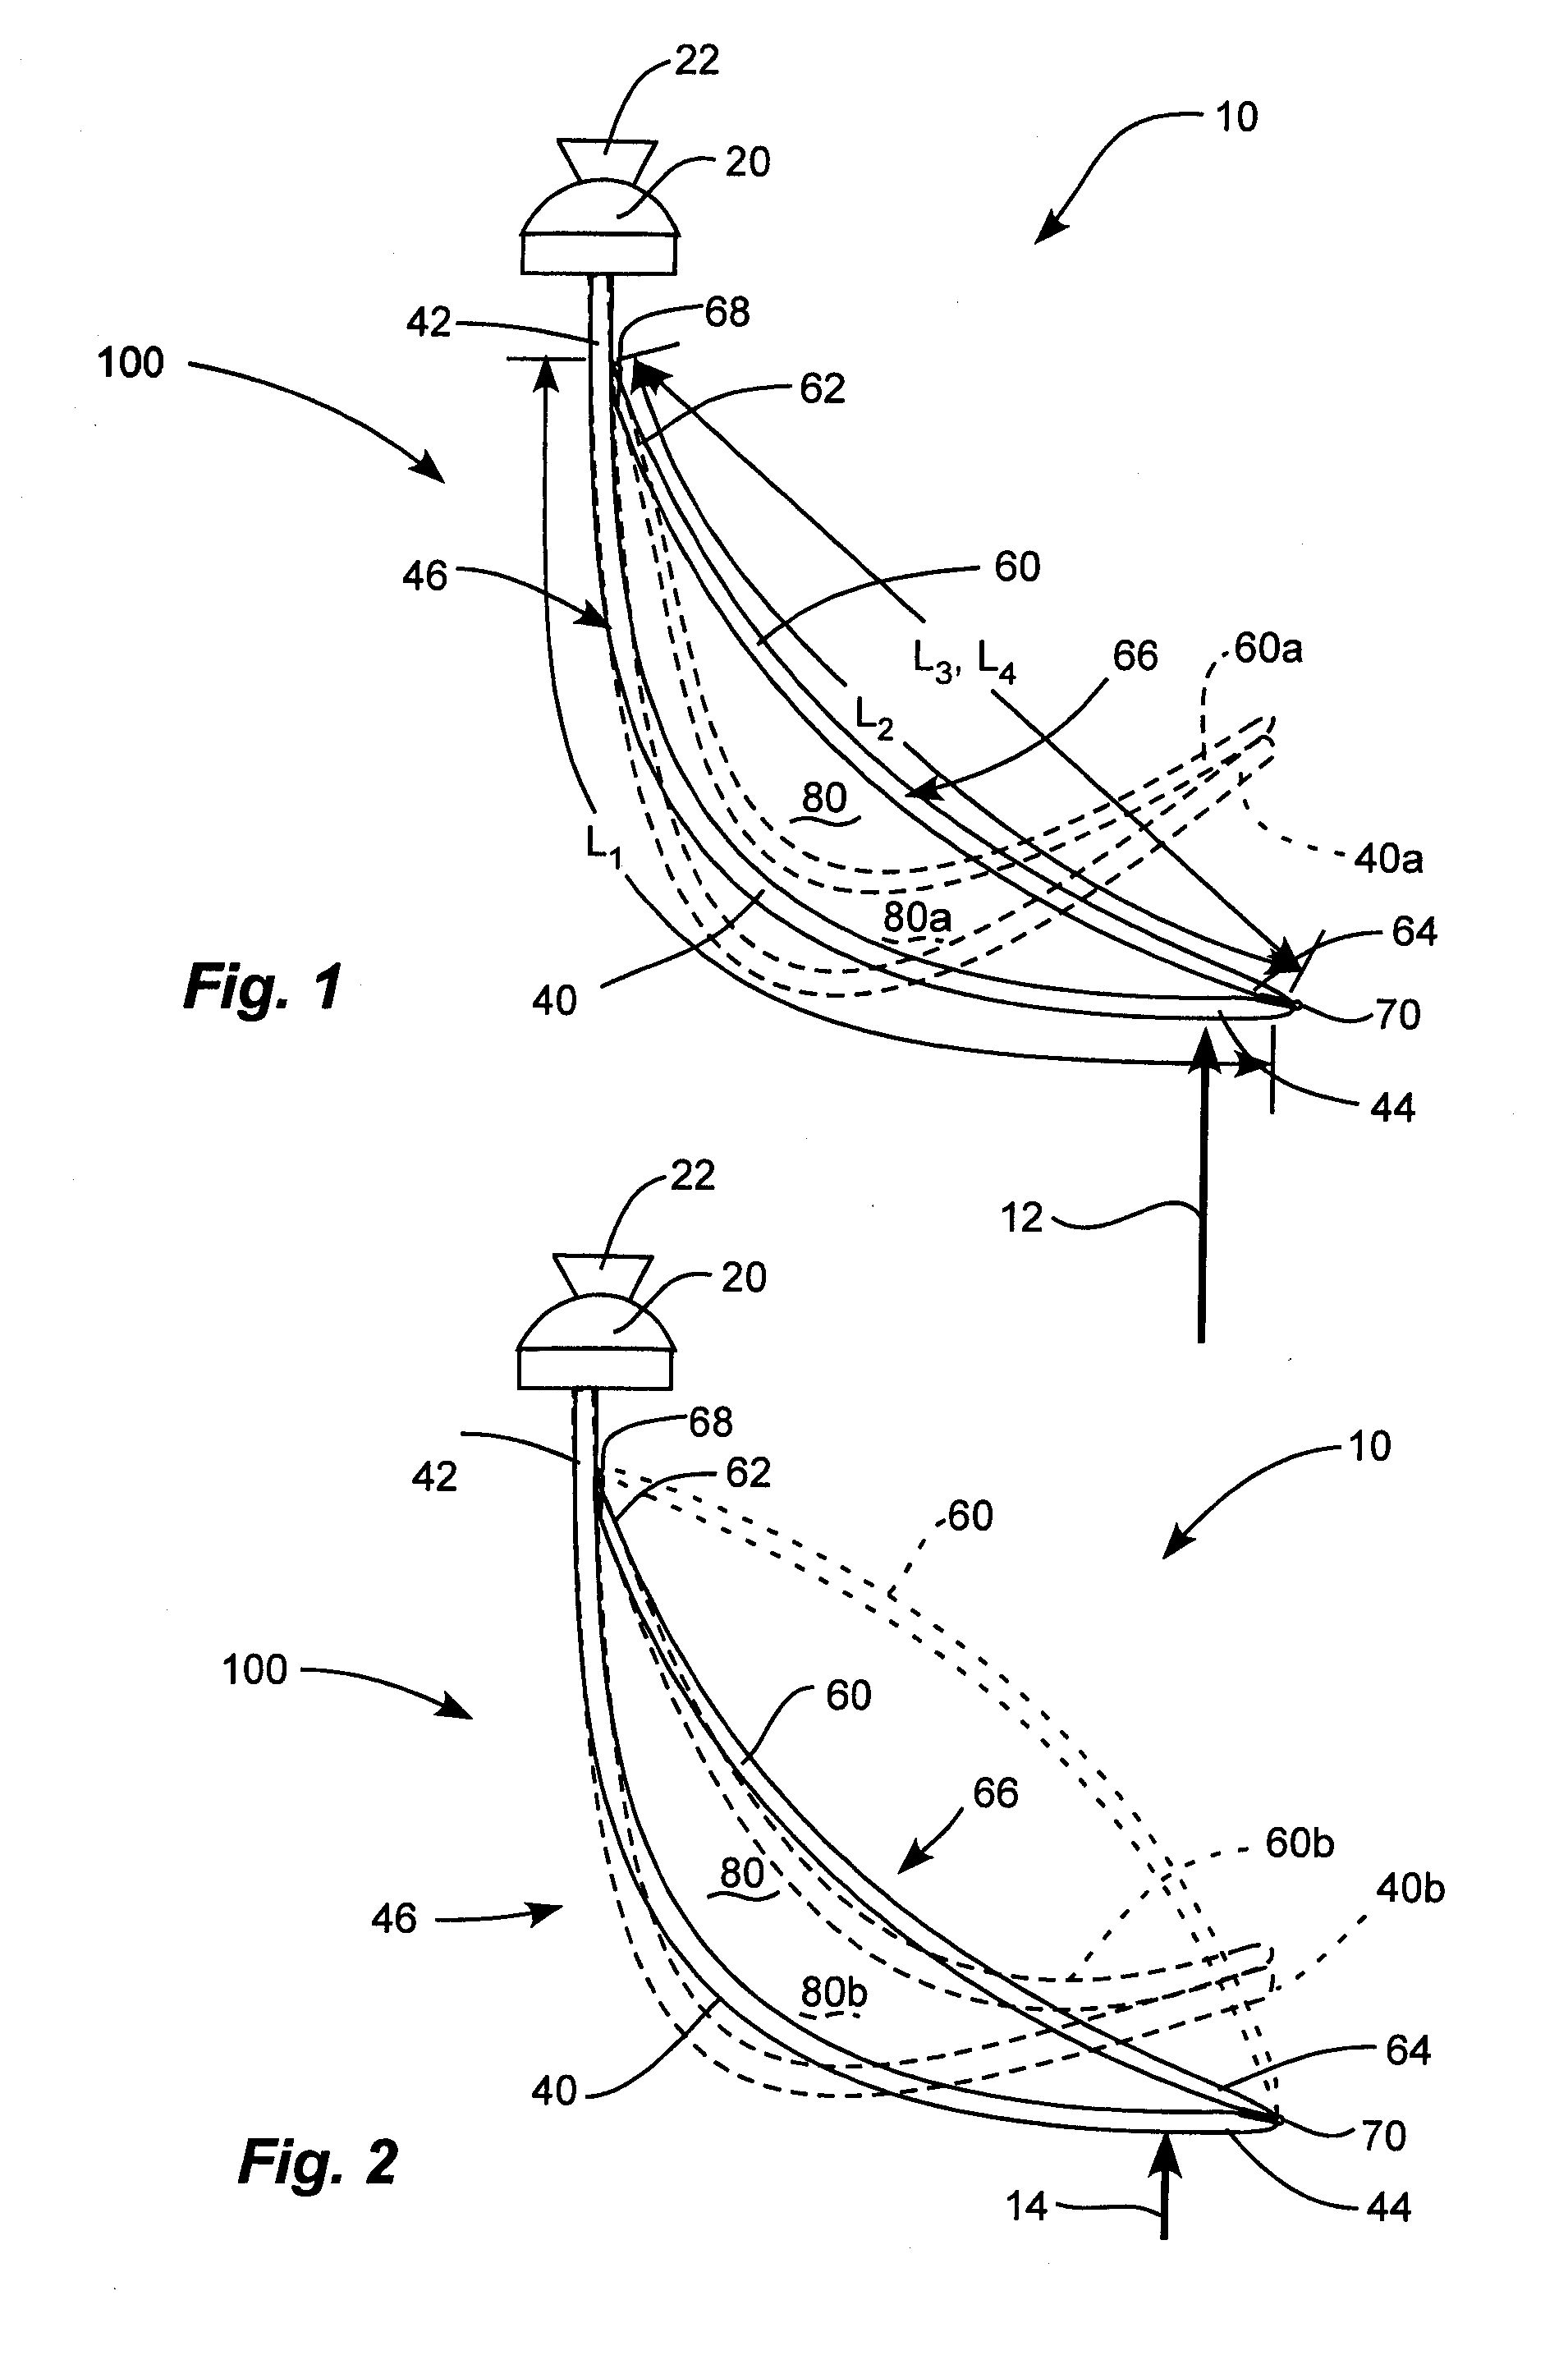 Prosthetic foot with two leaf-springs joined at heel and toe